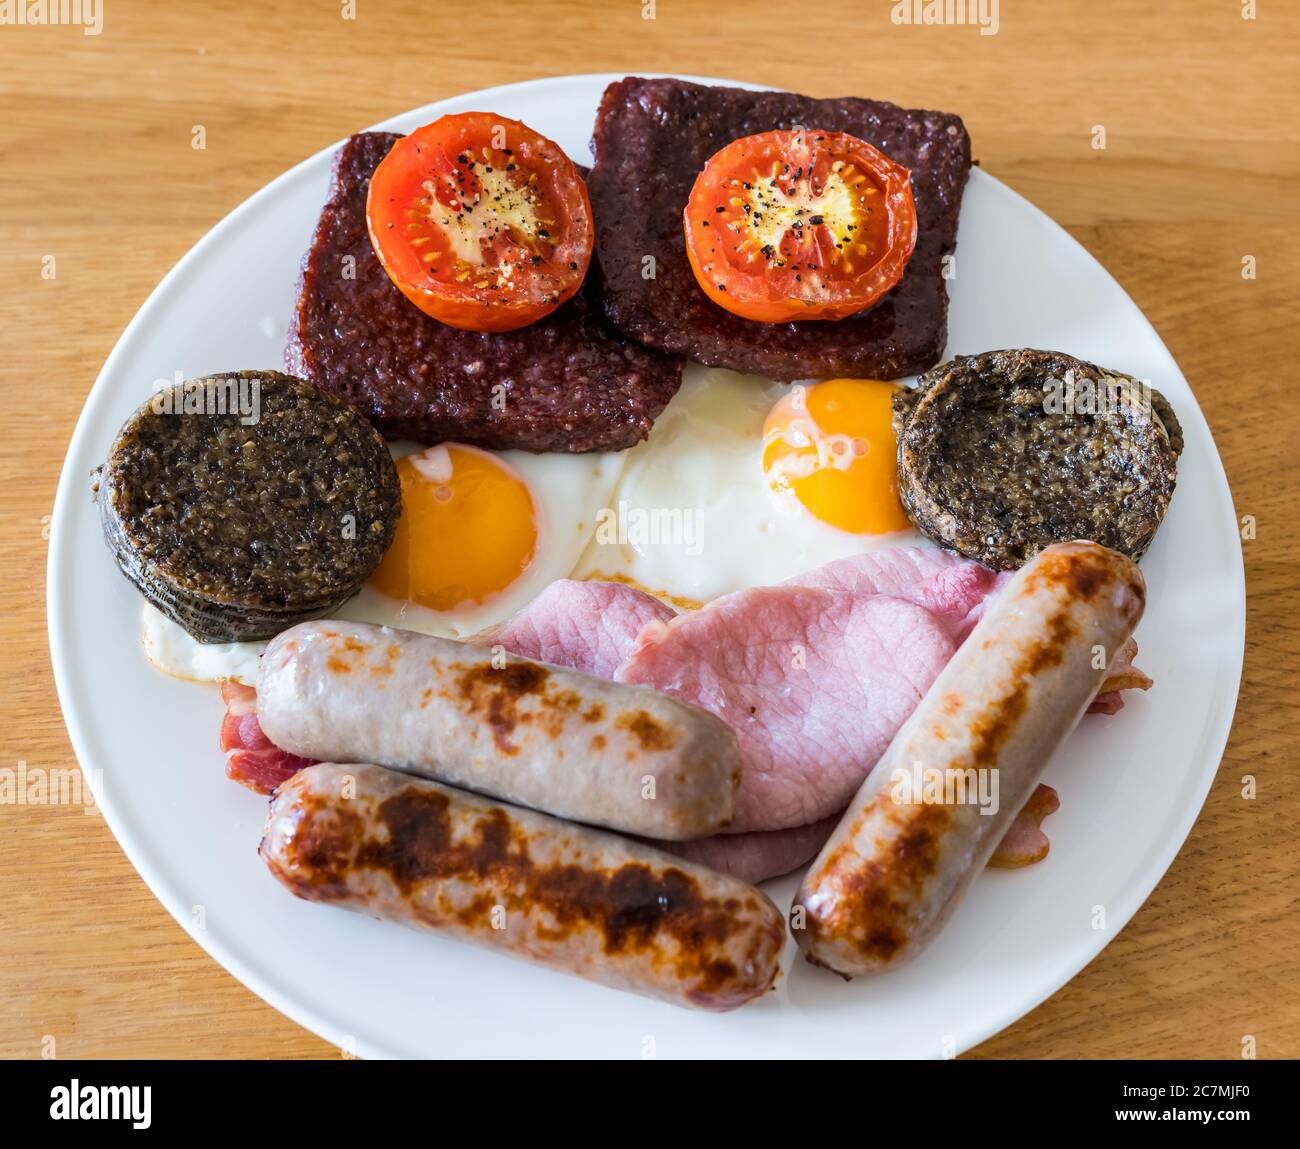 Unhealthy fry up breakfast on white plate with grilled tomatoes, haggis, Lorne sausage meat, pork sausages, fried eggs and bacon Stock Photo